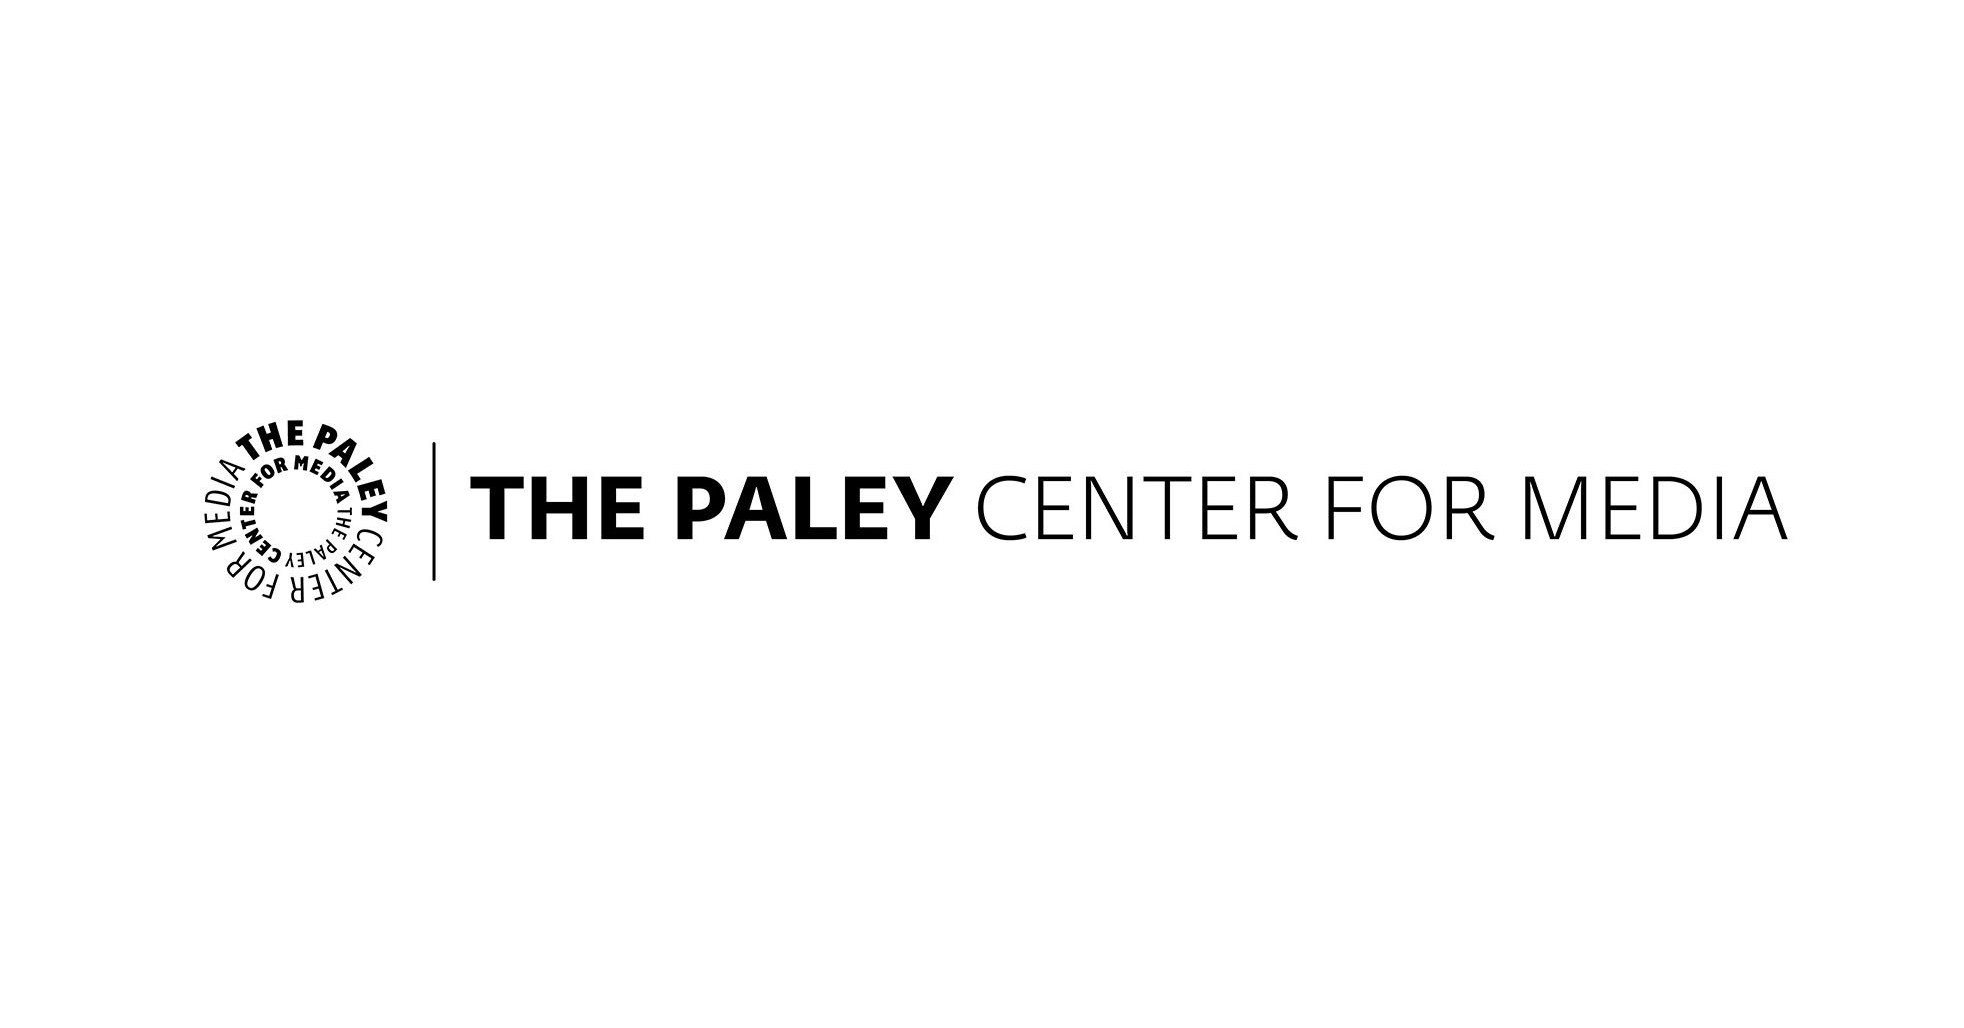 The Paley Center for Media Announces Schedule for the 28th Annual Paley International Council Summit "Forging New Horizons: The Next Era for Media" On November 8-9, 2022 at The Paley Museum